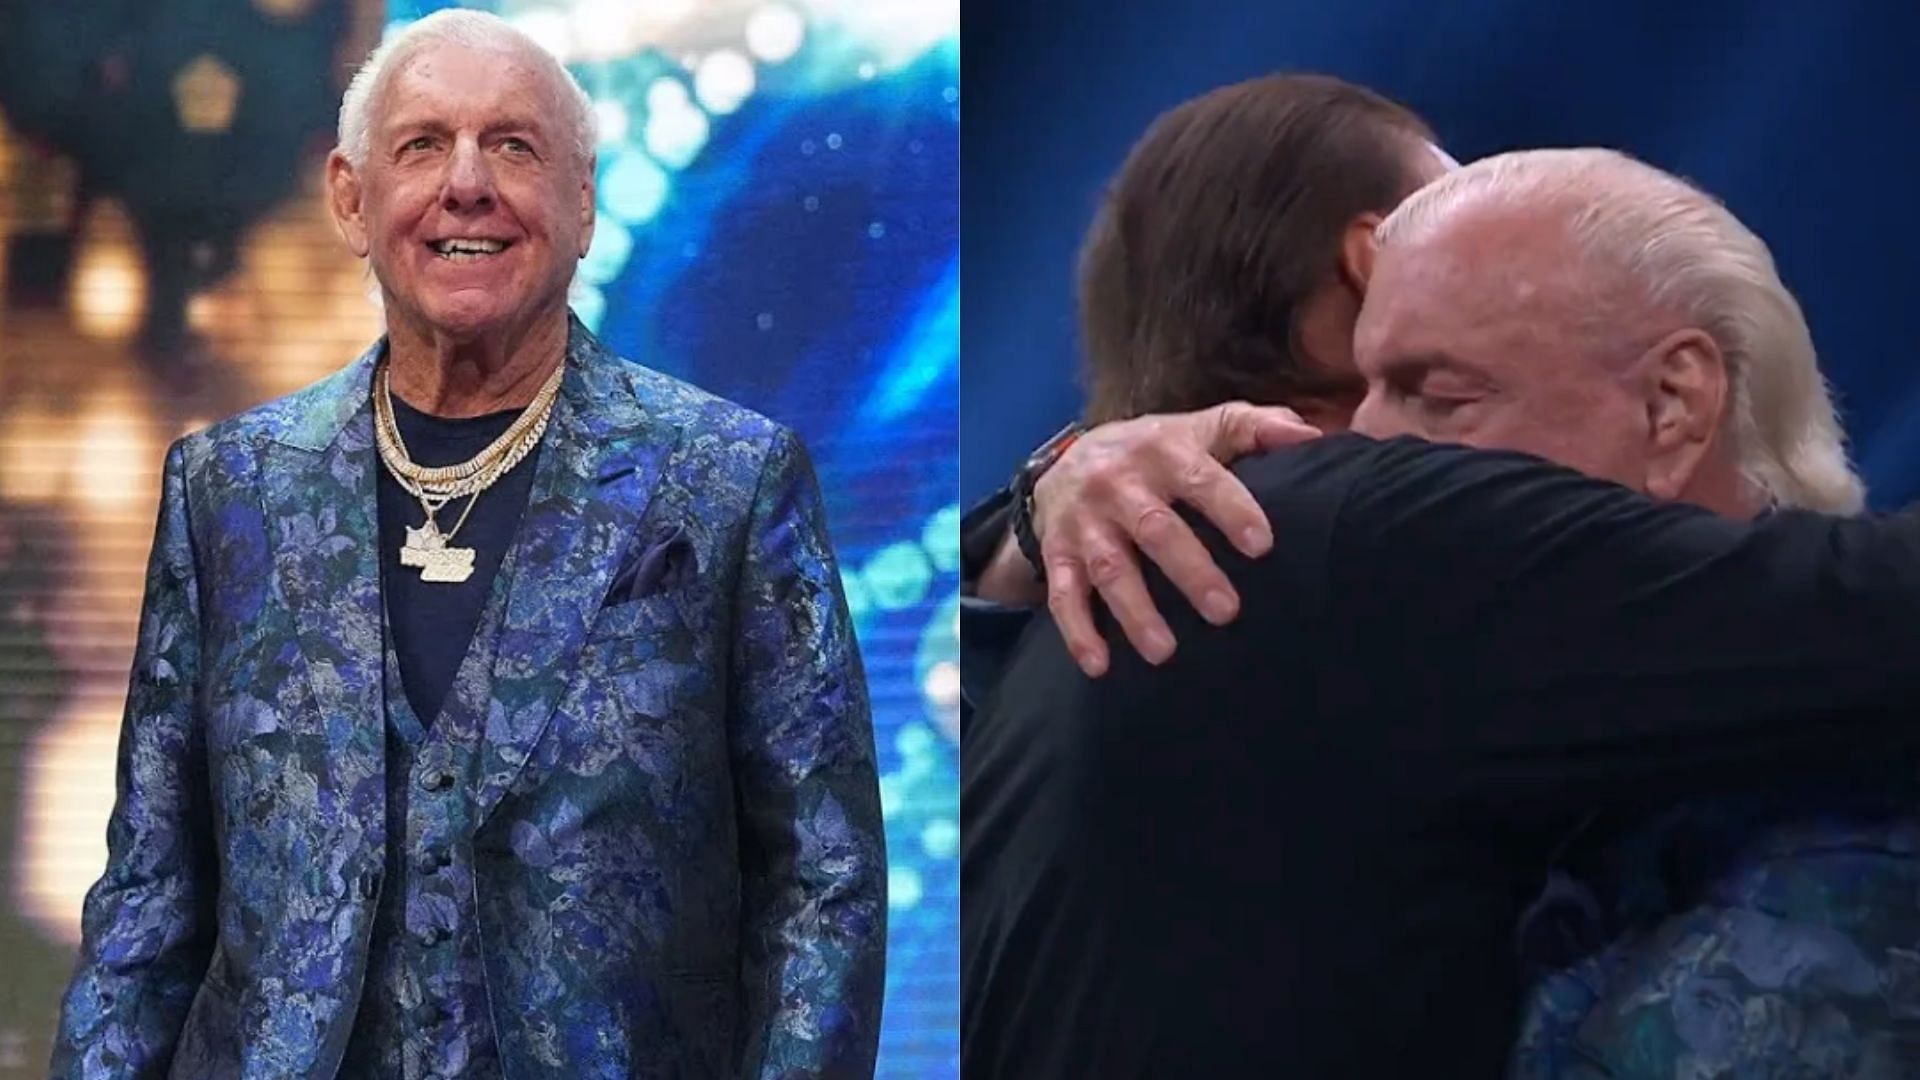 Will The Nature Boy have a legendary AEW run?